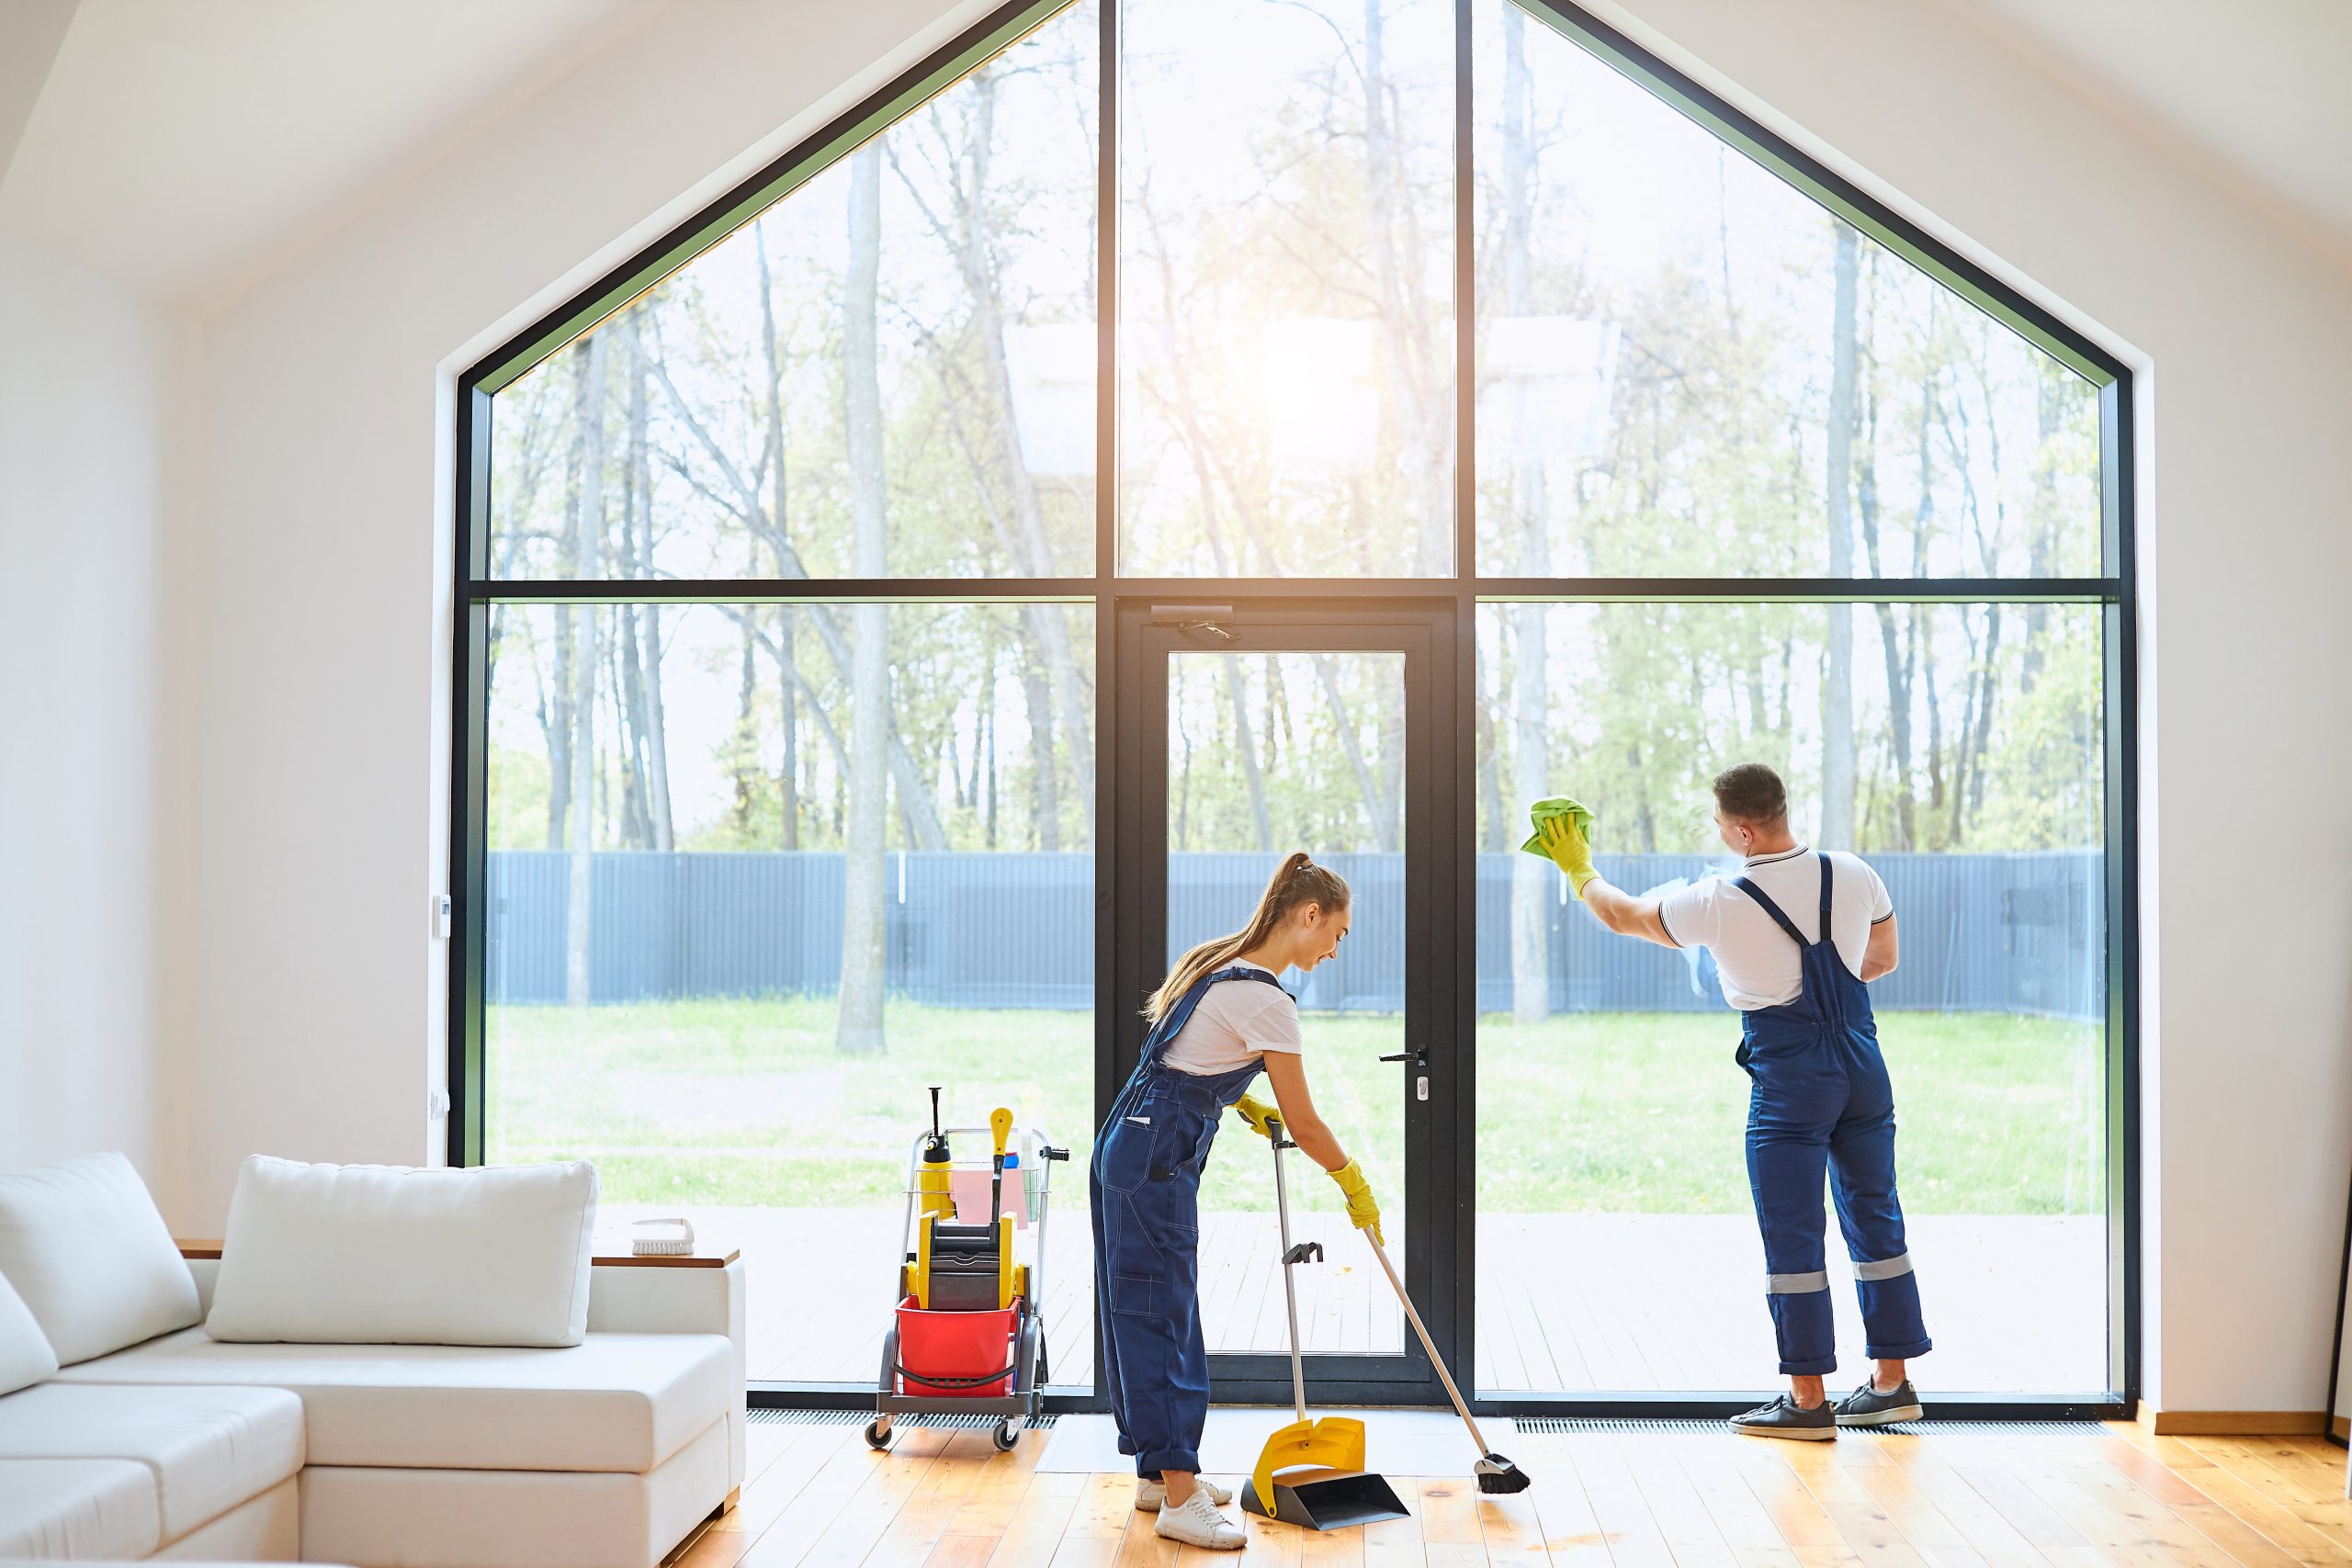 What are house cleaning services?